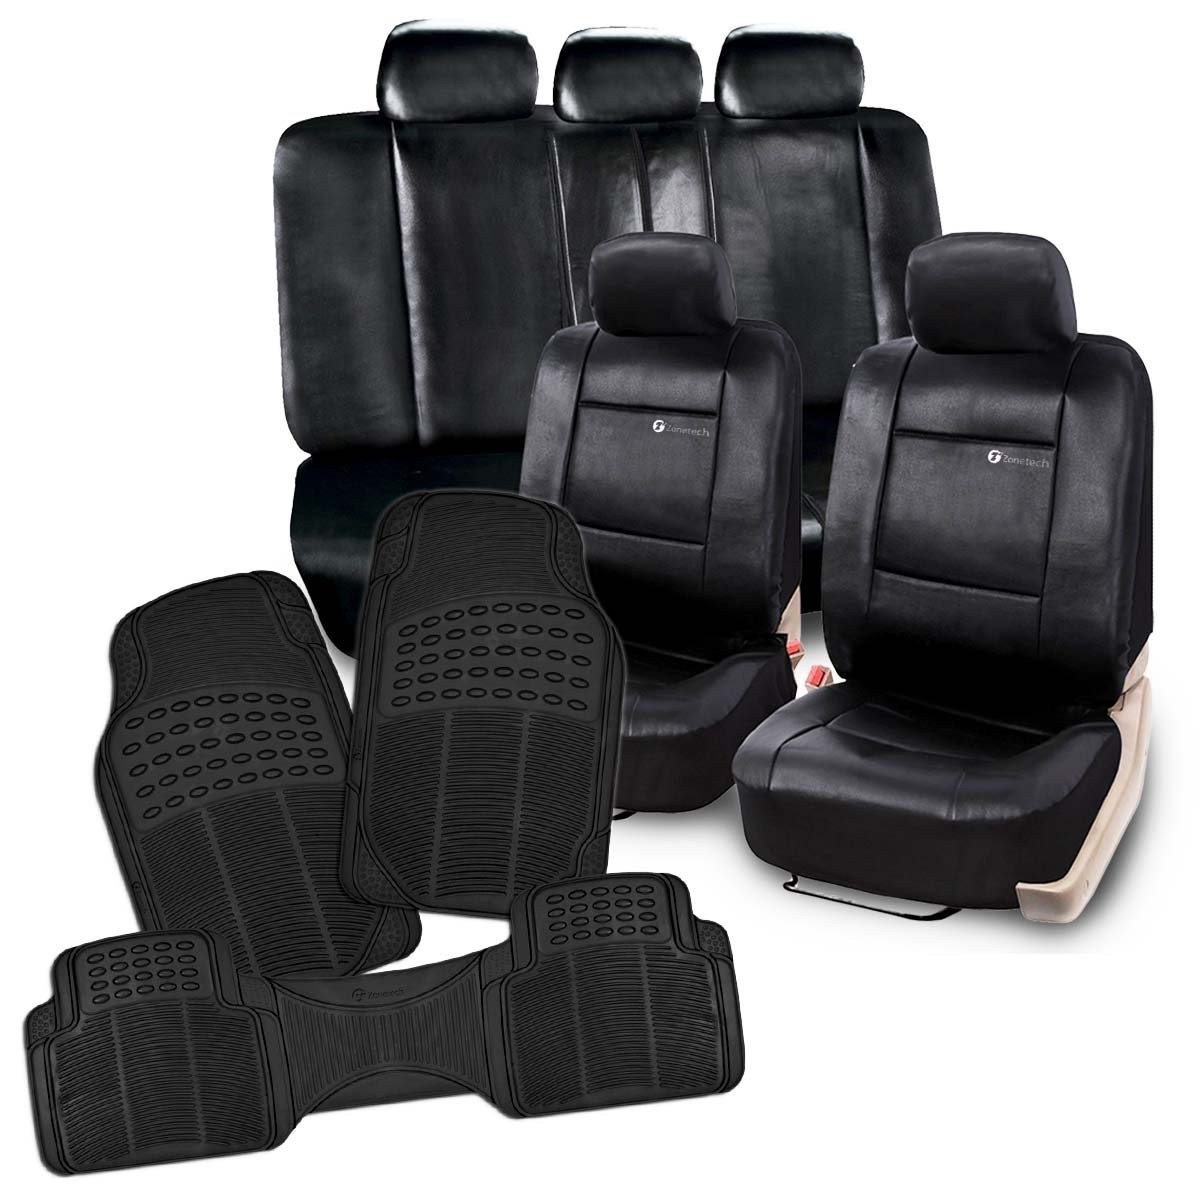 Black PU Leather Full Seat Cover Set+ Black All Weather Full Rubber Trimable Floor Mat- 4 Piece